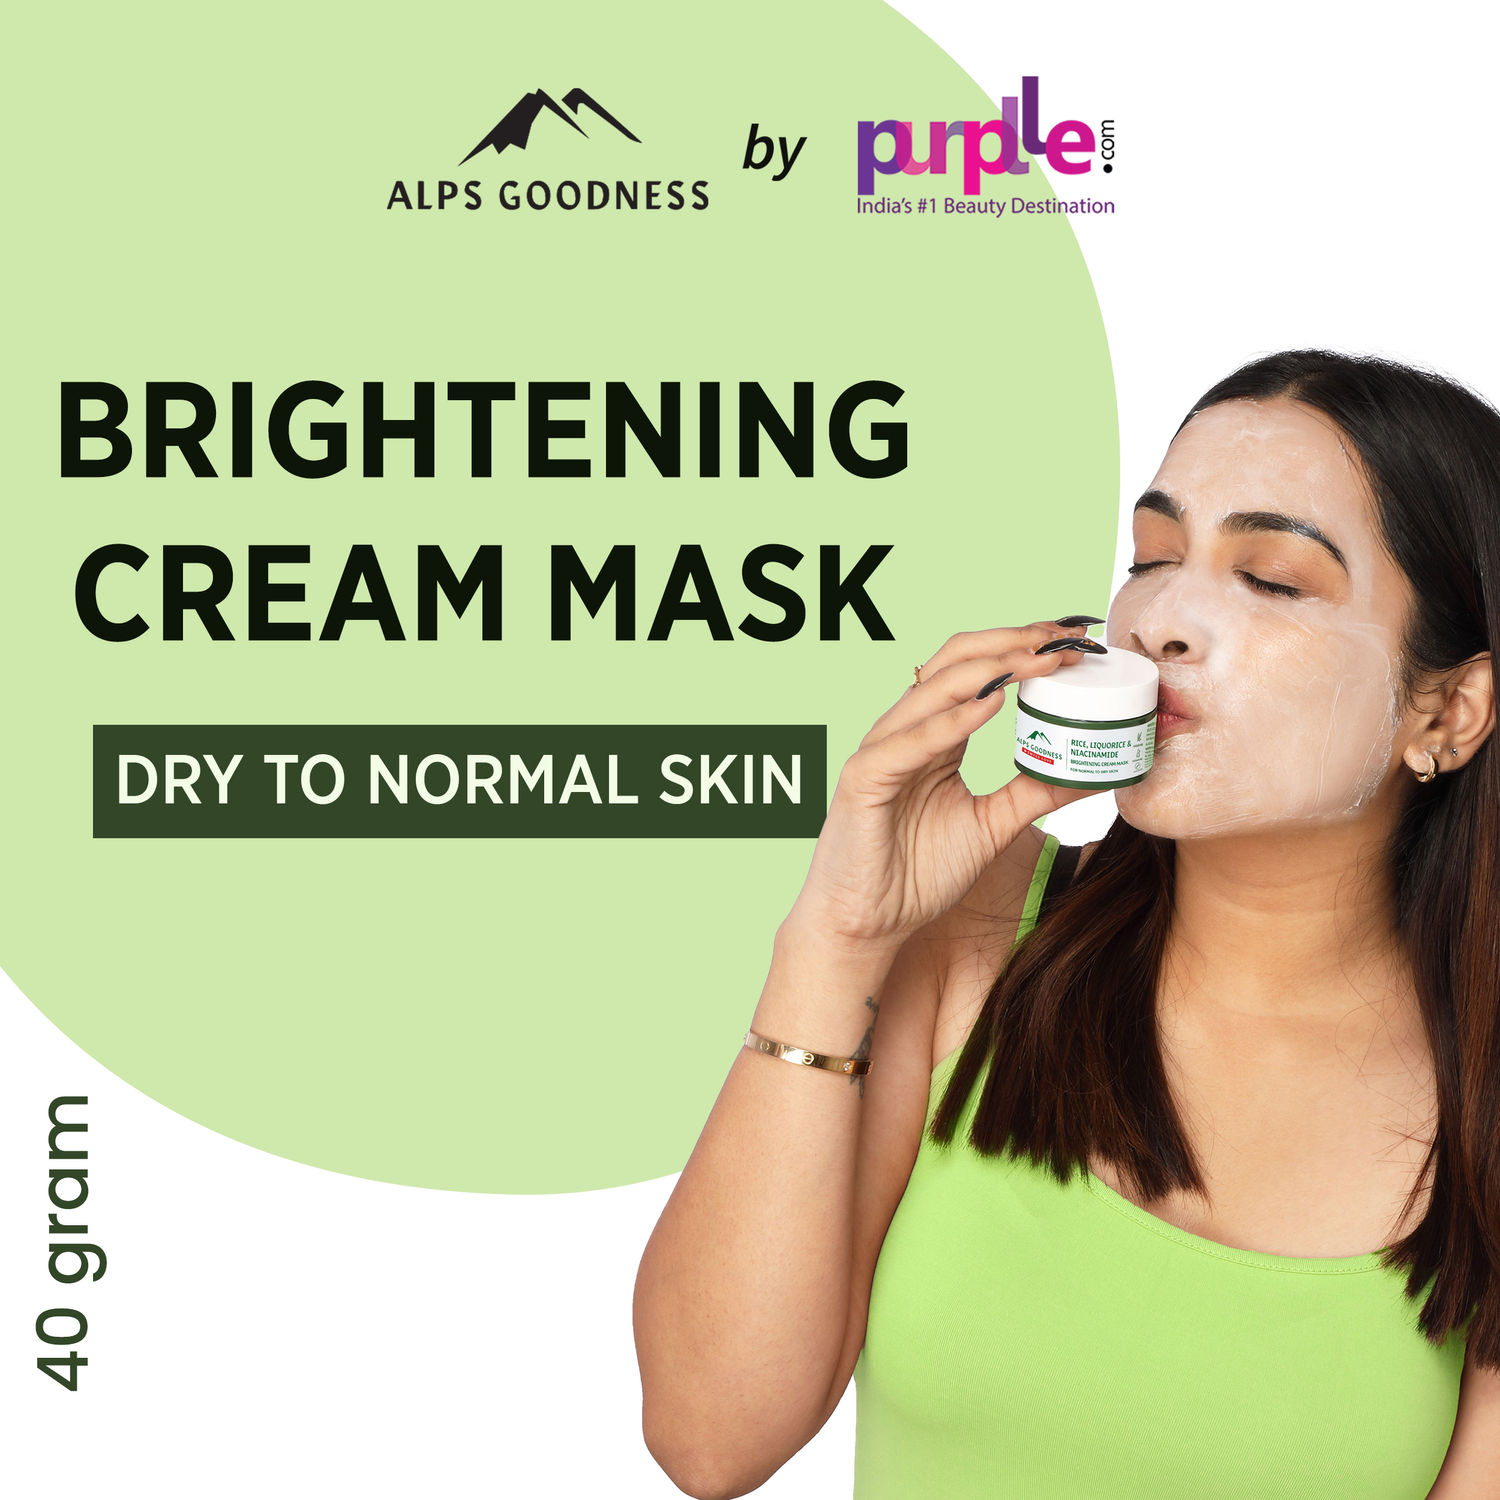 Buy Alps Goodness Rice, Liquorice & Niacinamide Brightening Cream Mask for Normal to Dry Skin (40 g)| Niacinamide Mask| Rice Mask| Liquorice mask| Rice Face Mask| Niacinamide Face Mask| Cream Face Mask - Purplle